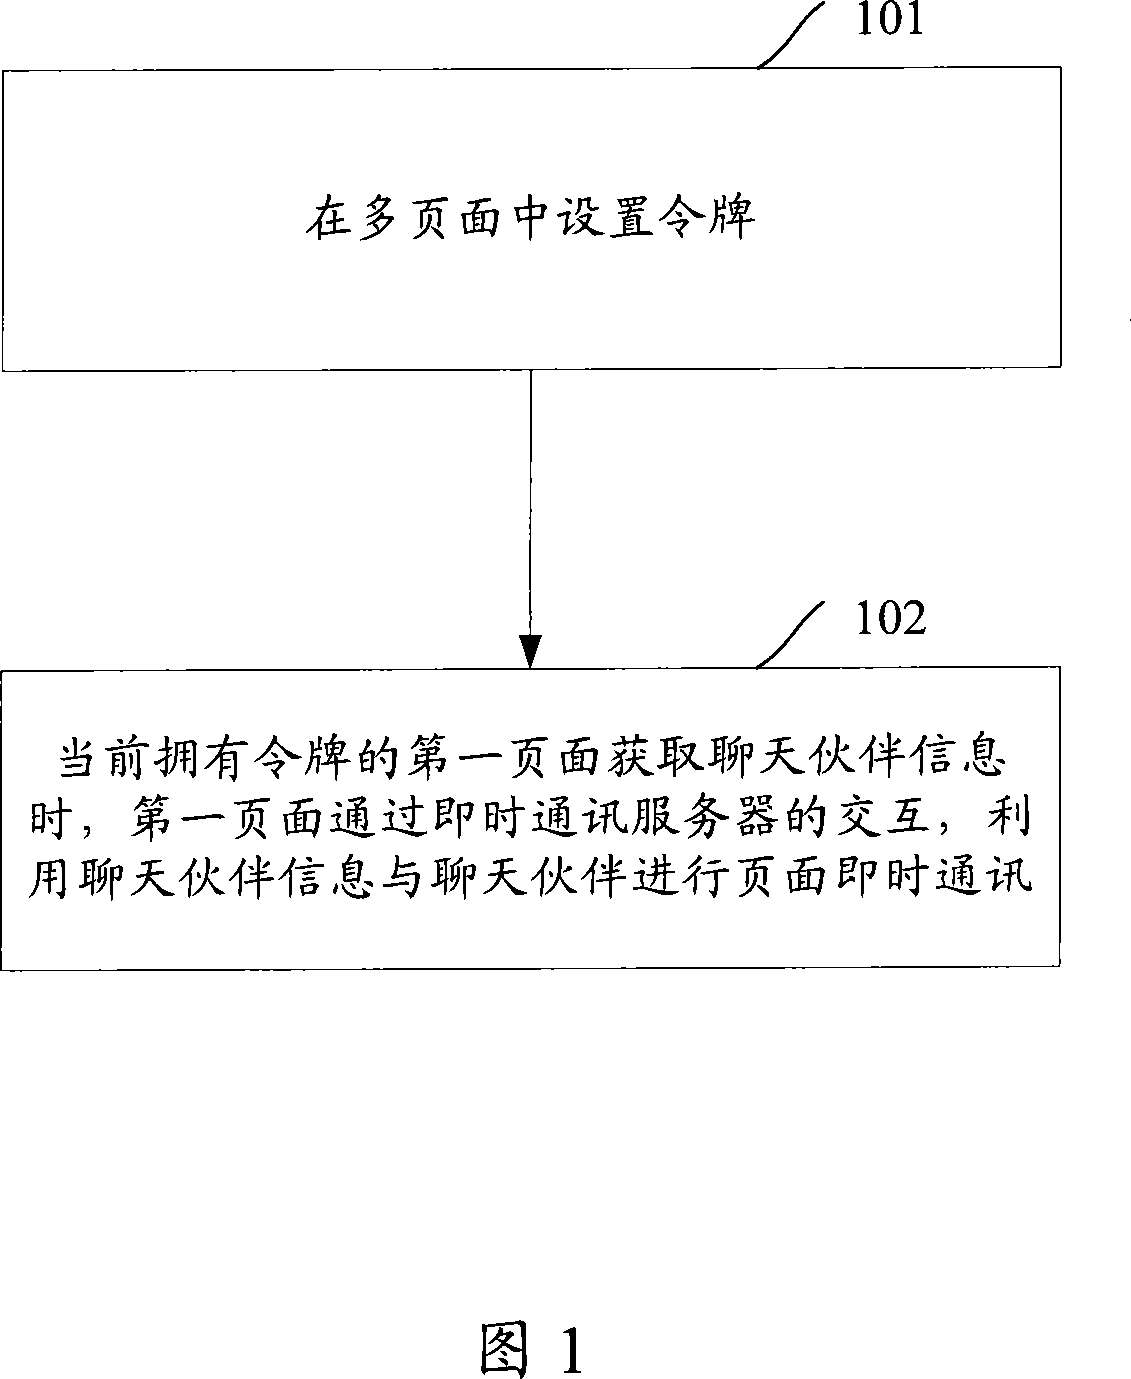 Multi-page instant communication method and system